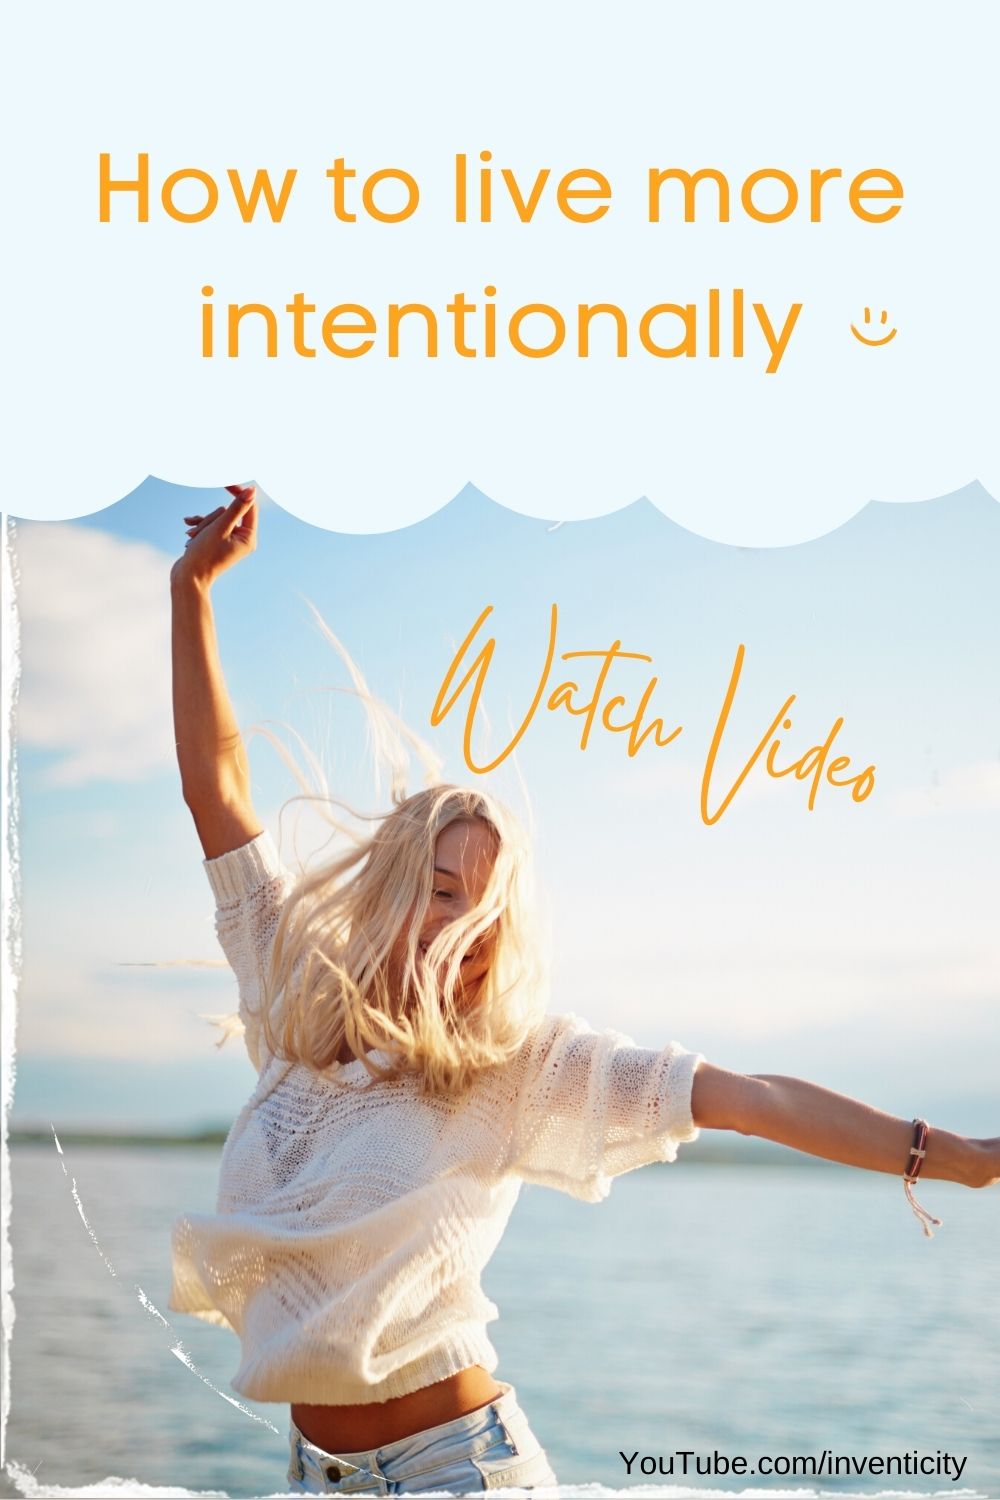 How to live more intentionally